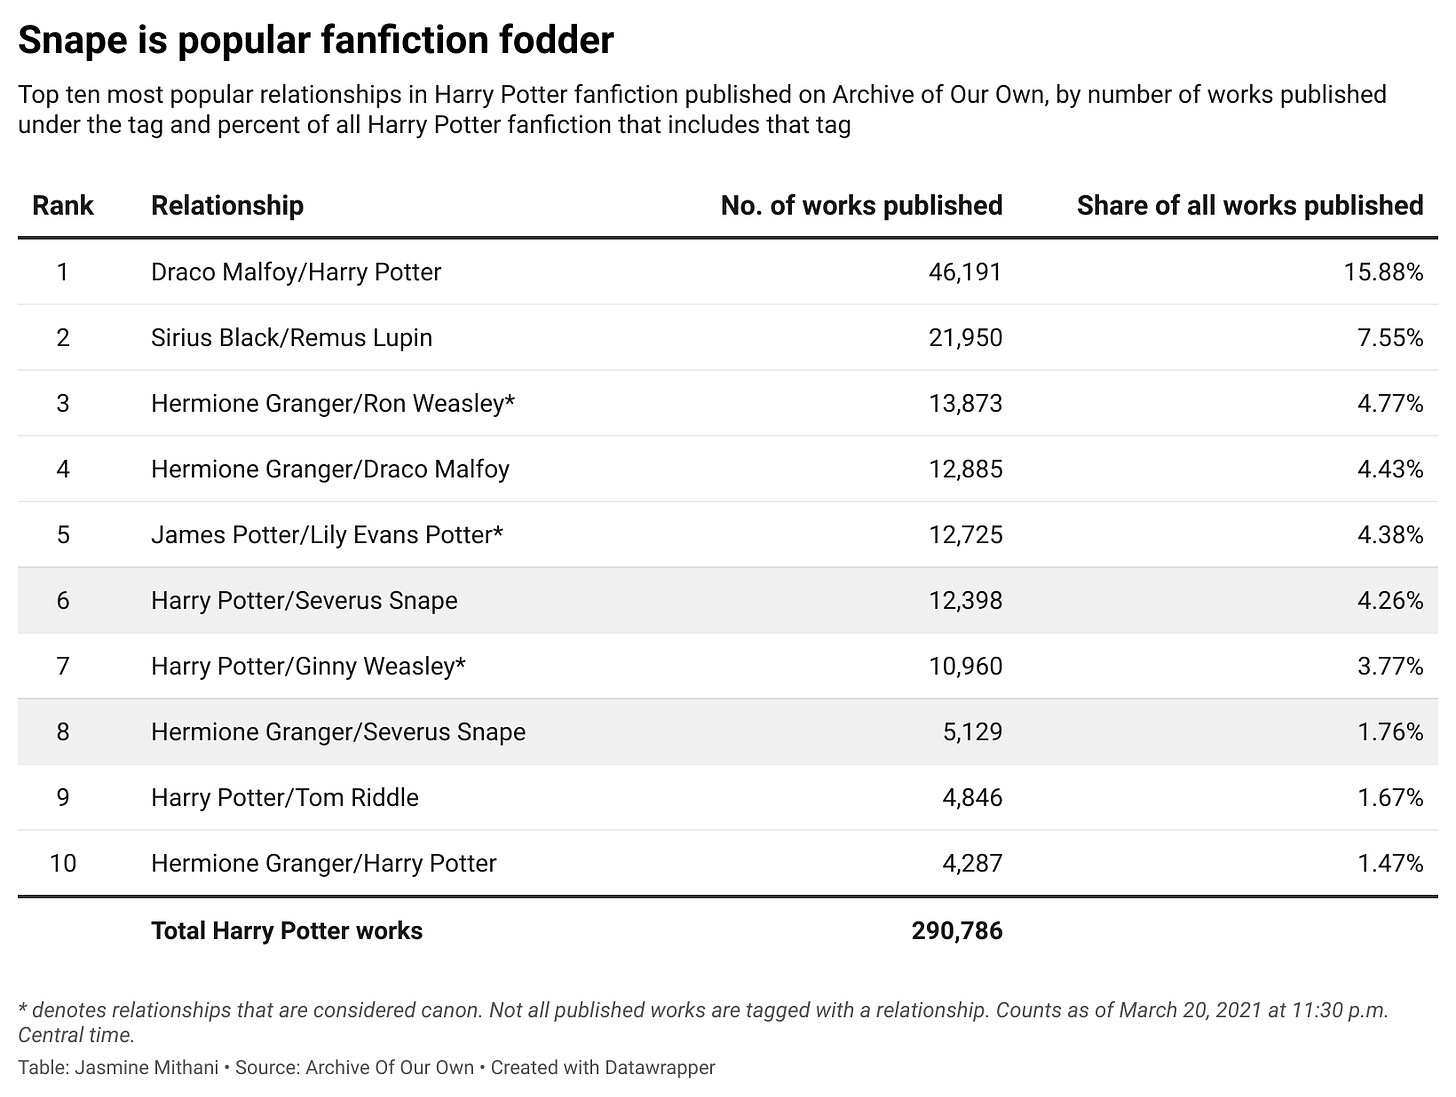 Snape is populat fanficiton fodder: Top ten most popular relationships in Harry Potter fanfiction published on Archive of Our Own, by number of works published under the tag and percent of all Harry Potter fanfiction that includes that tag